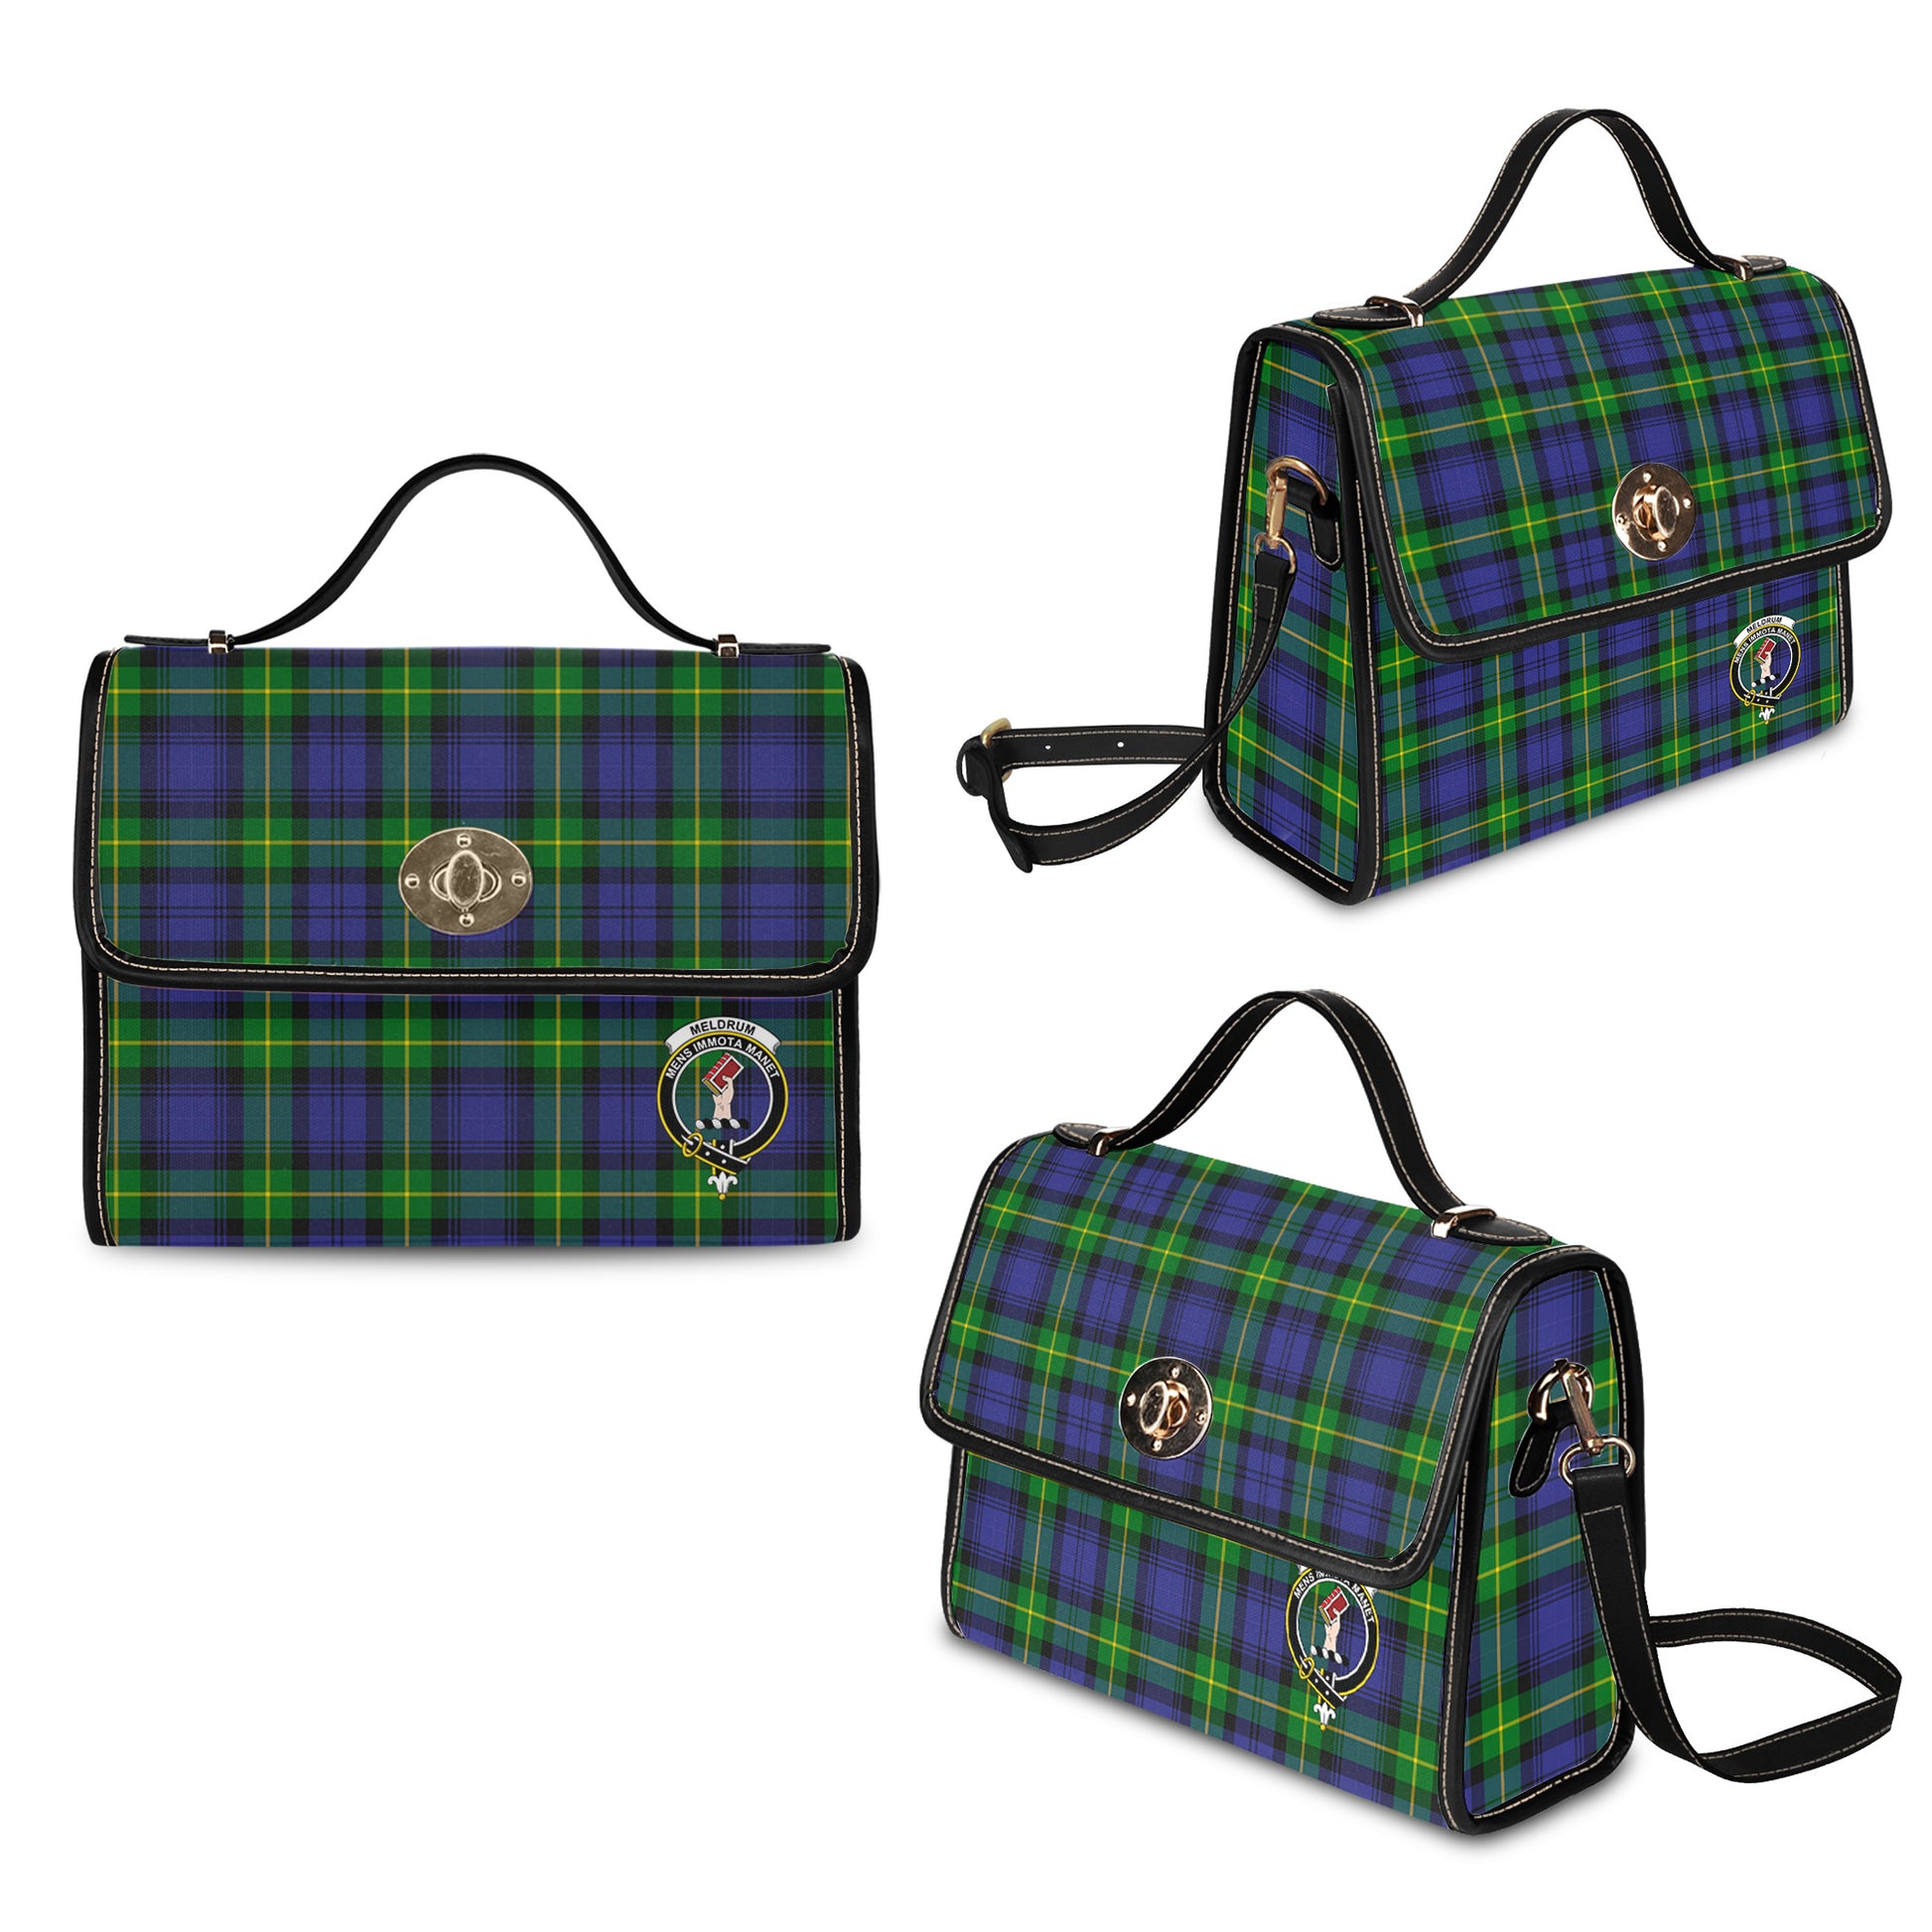 meldrum-tartan-leather-strap-waterproof-canvas-bag-with-family-crest